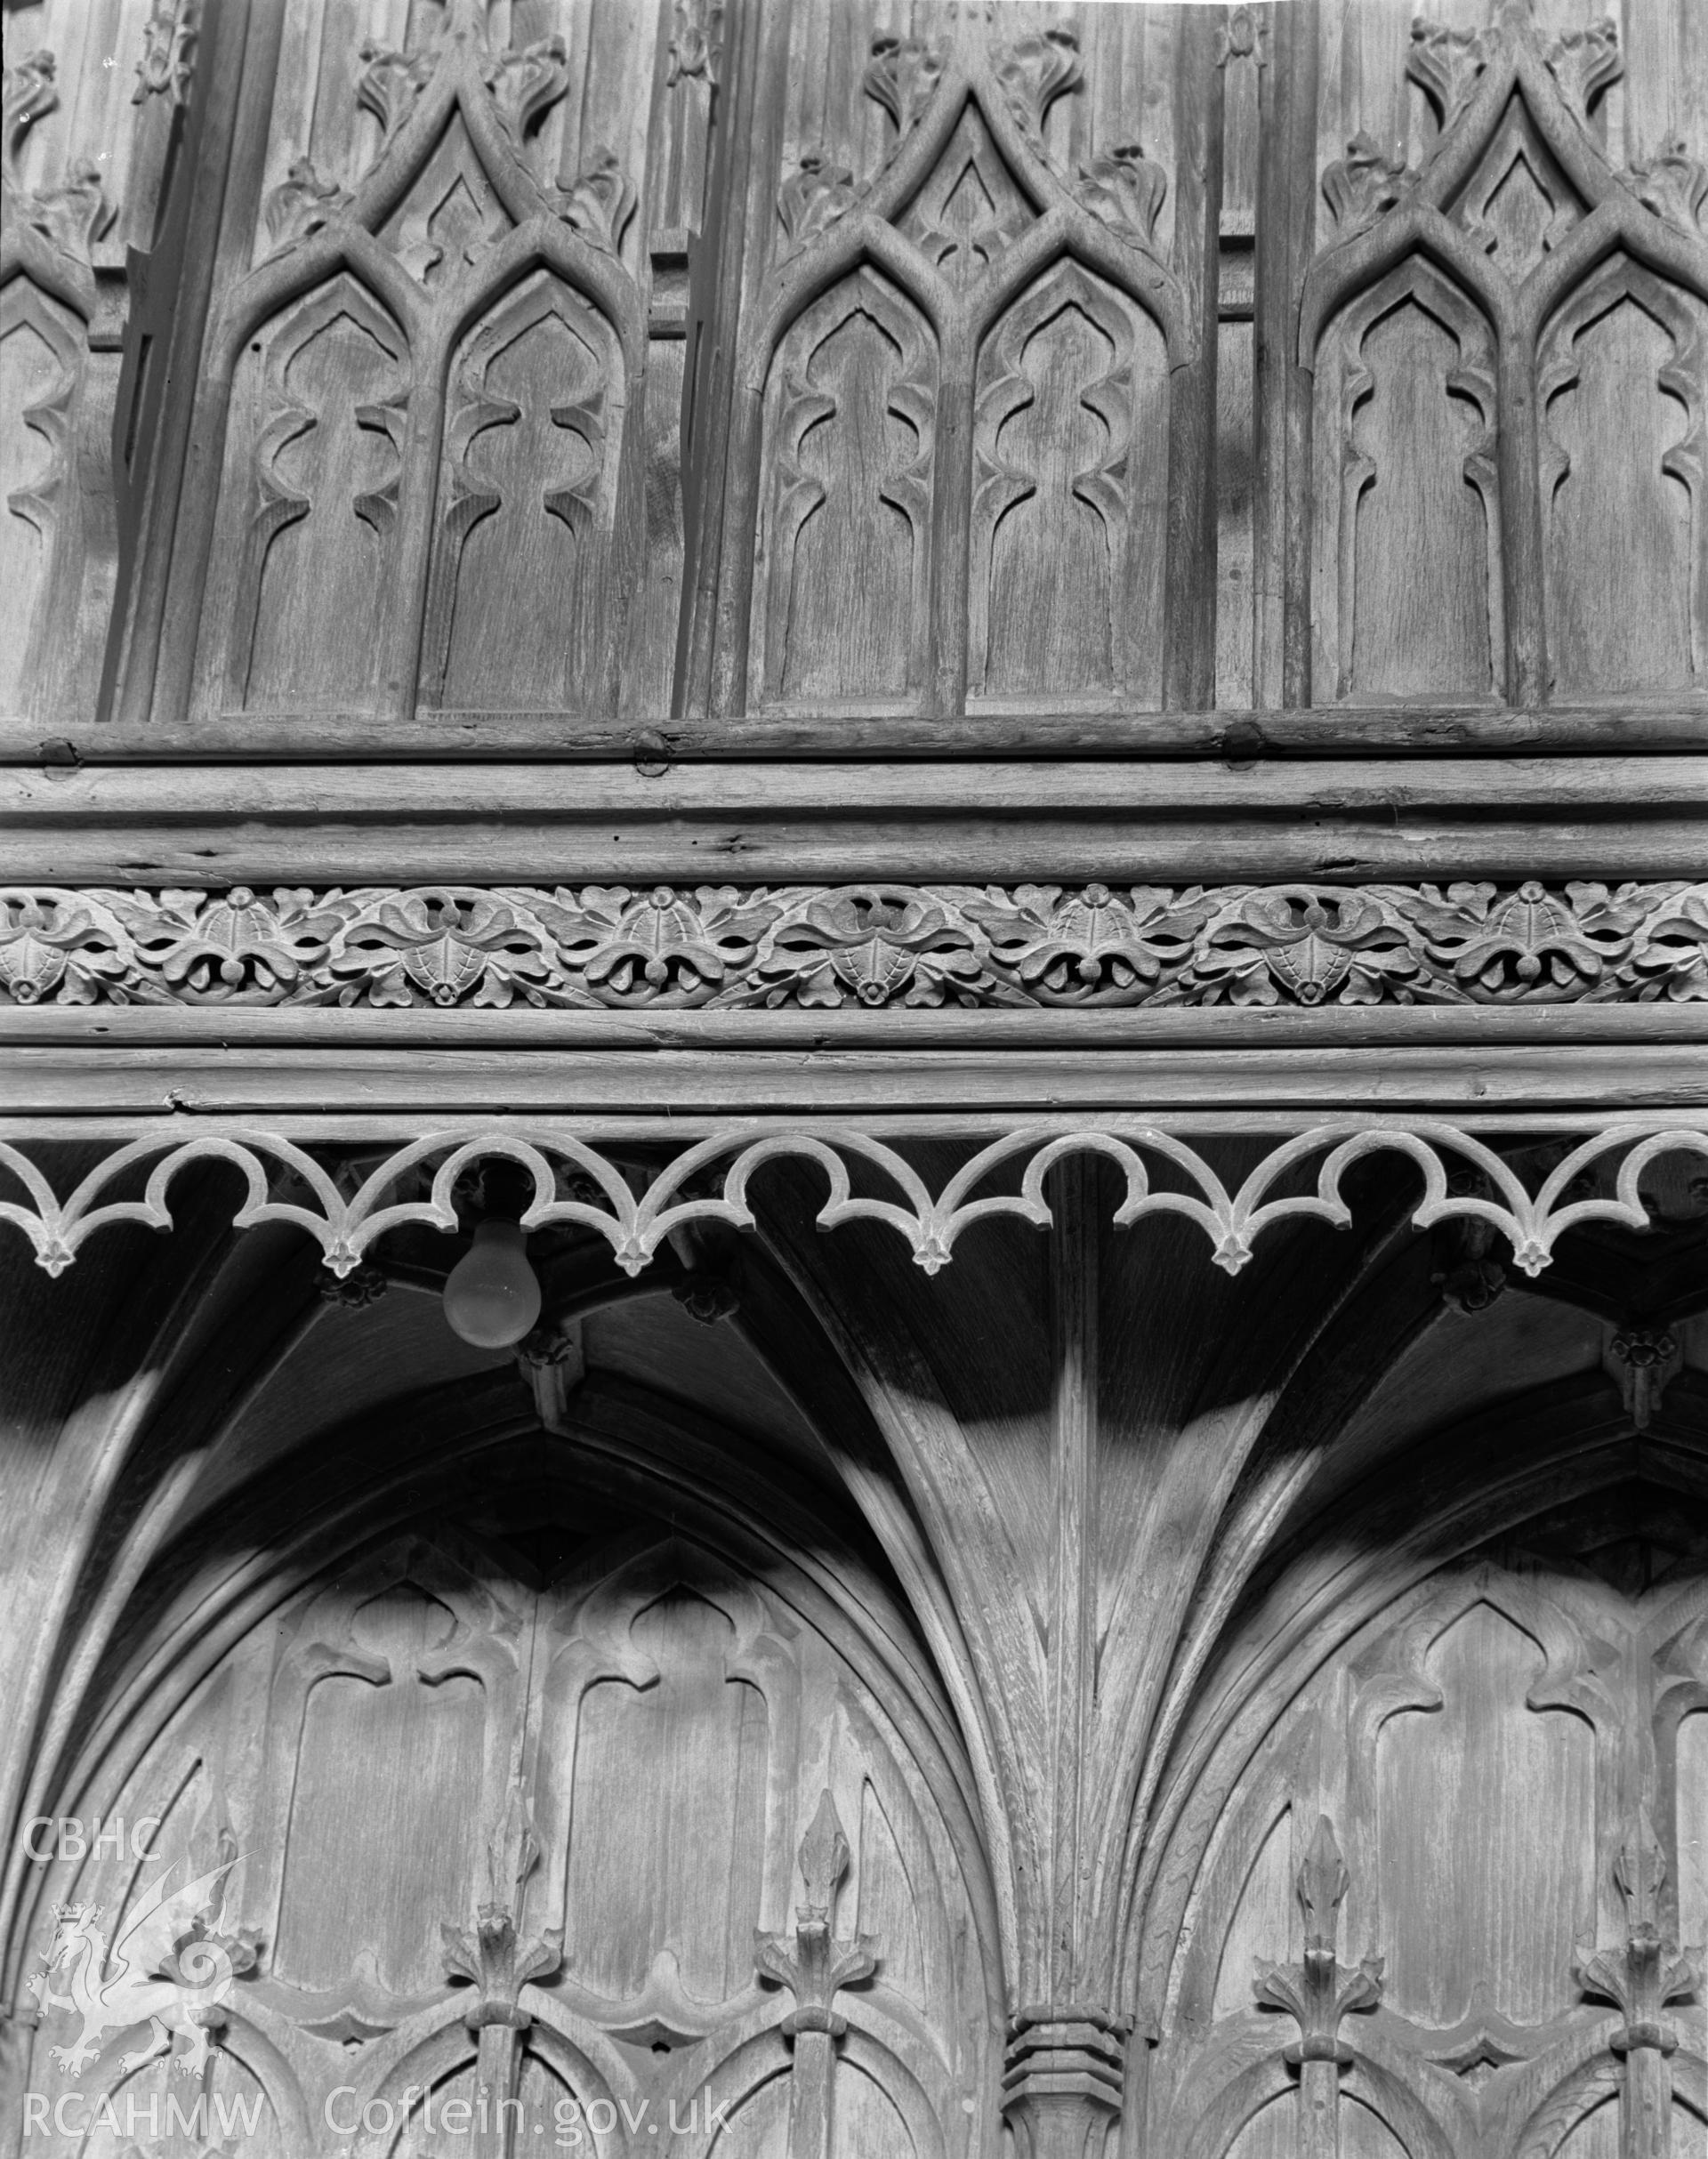 Interior view showing detail of canopy on church stalls.